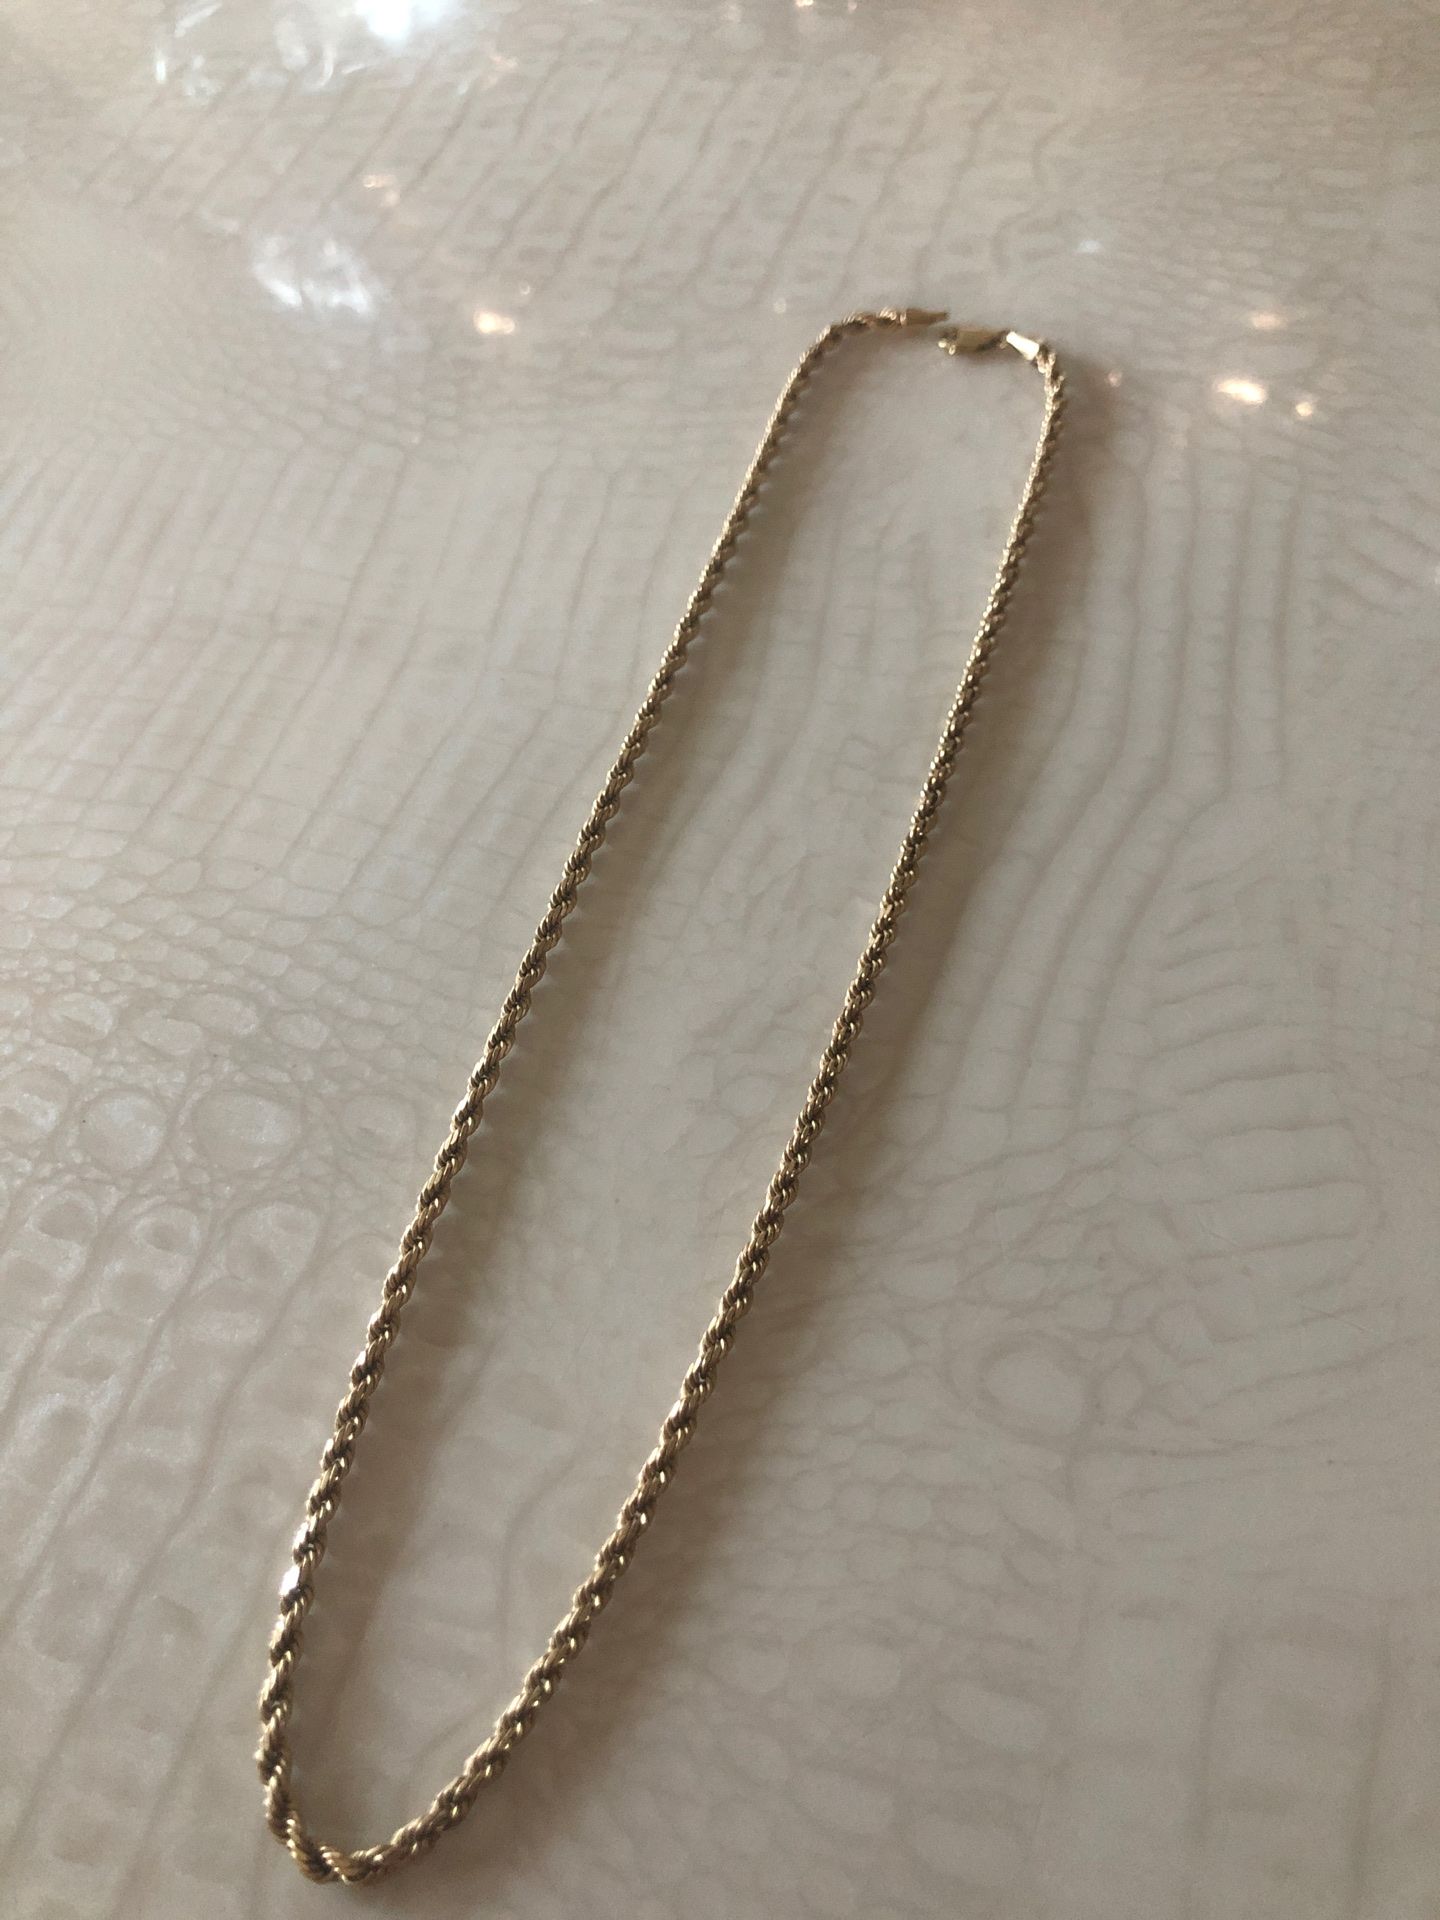 10k solid gold necklace